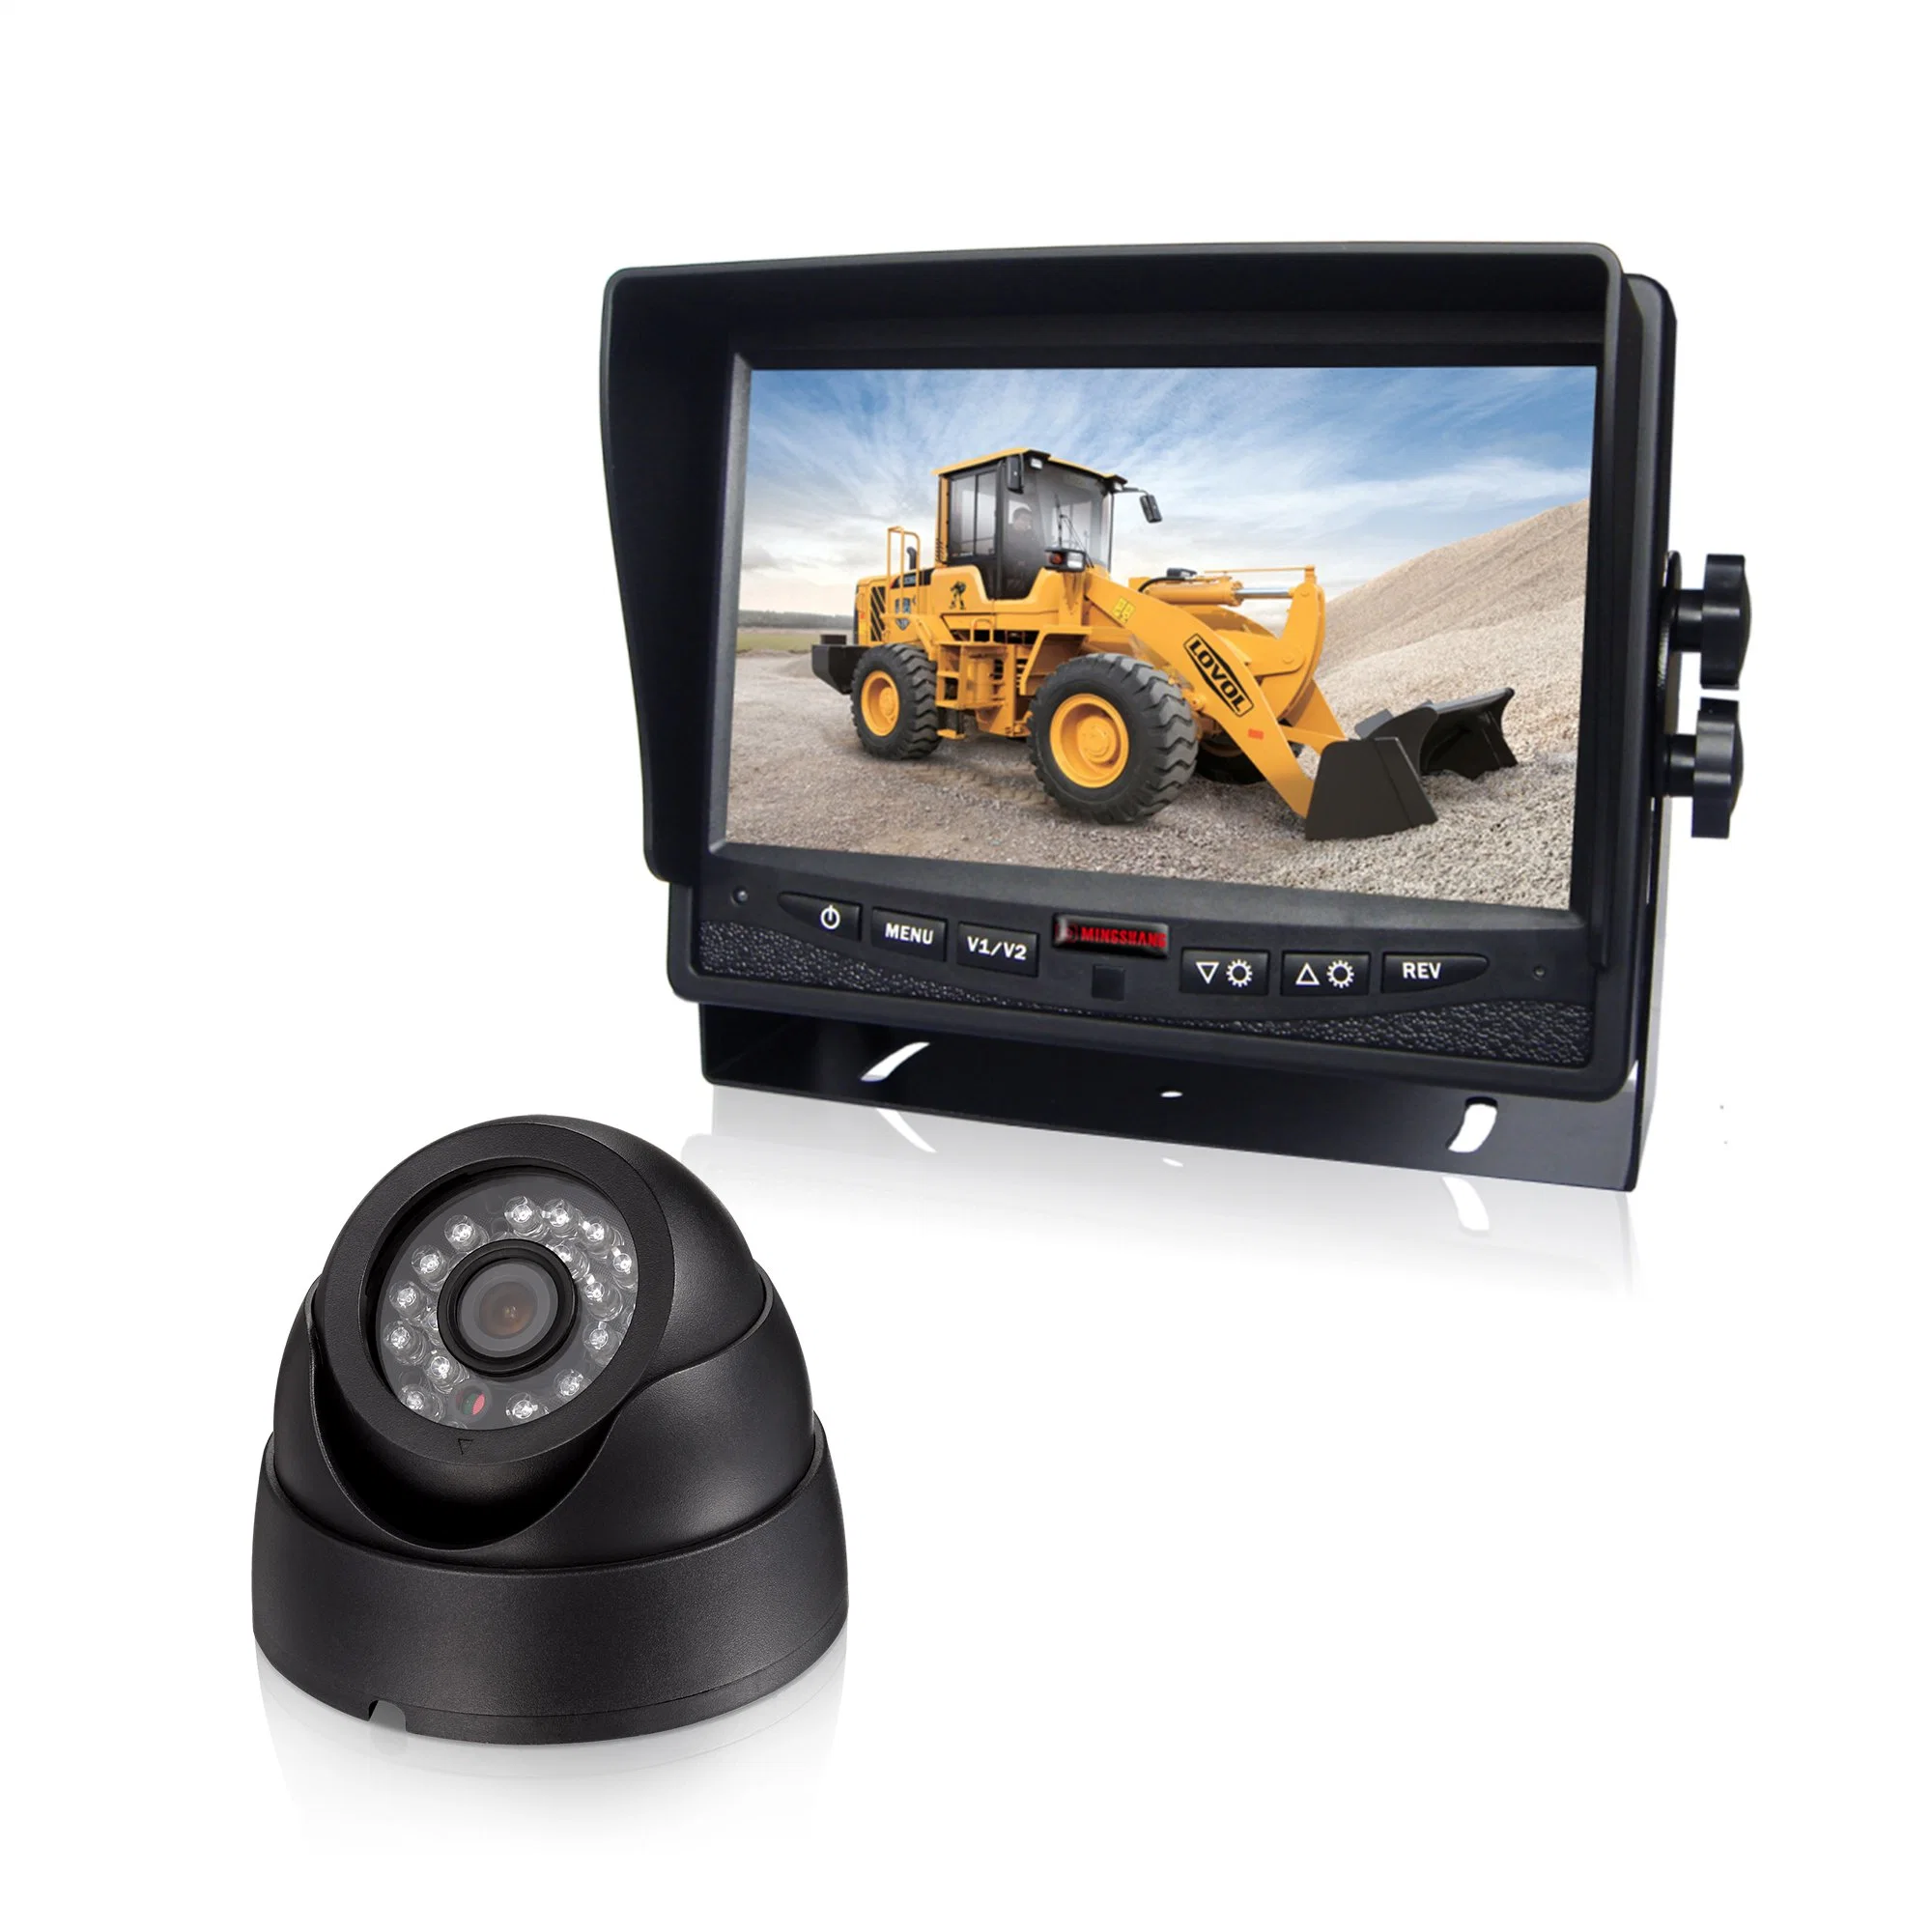 Car Rear View System with 7" LCD Monitor and CCD Camera